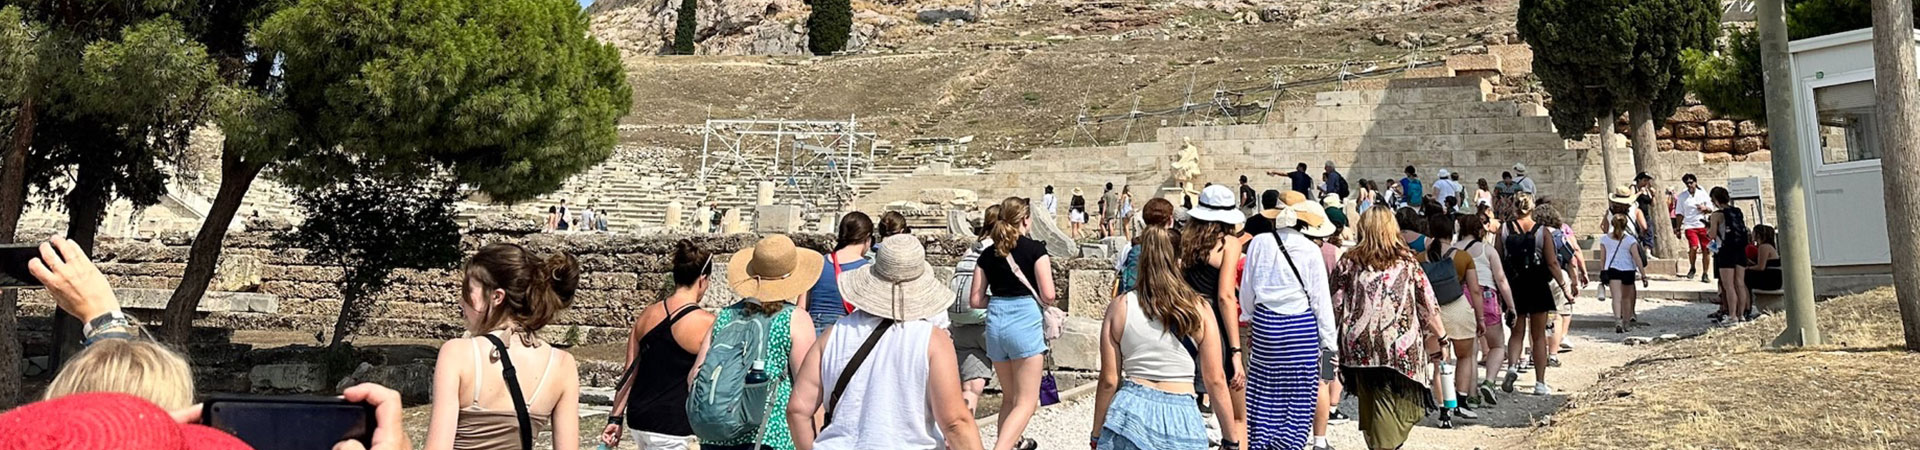  A large group of girls and women outside and dressed for warm weather. They are walking toward a large set of stone steps carved into a hill 